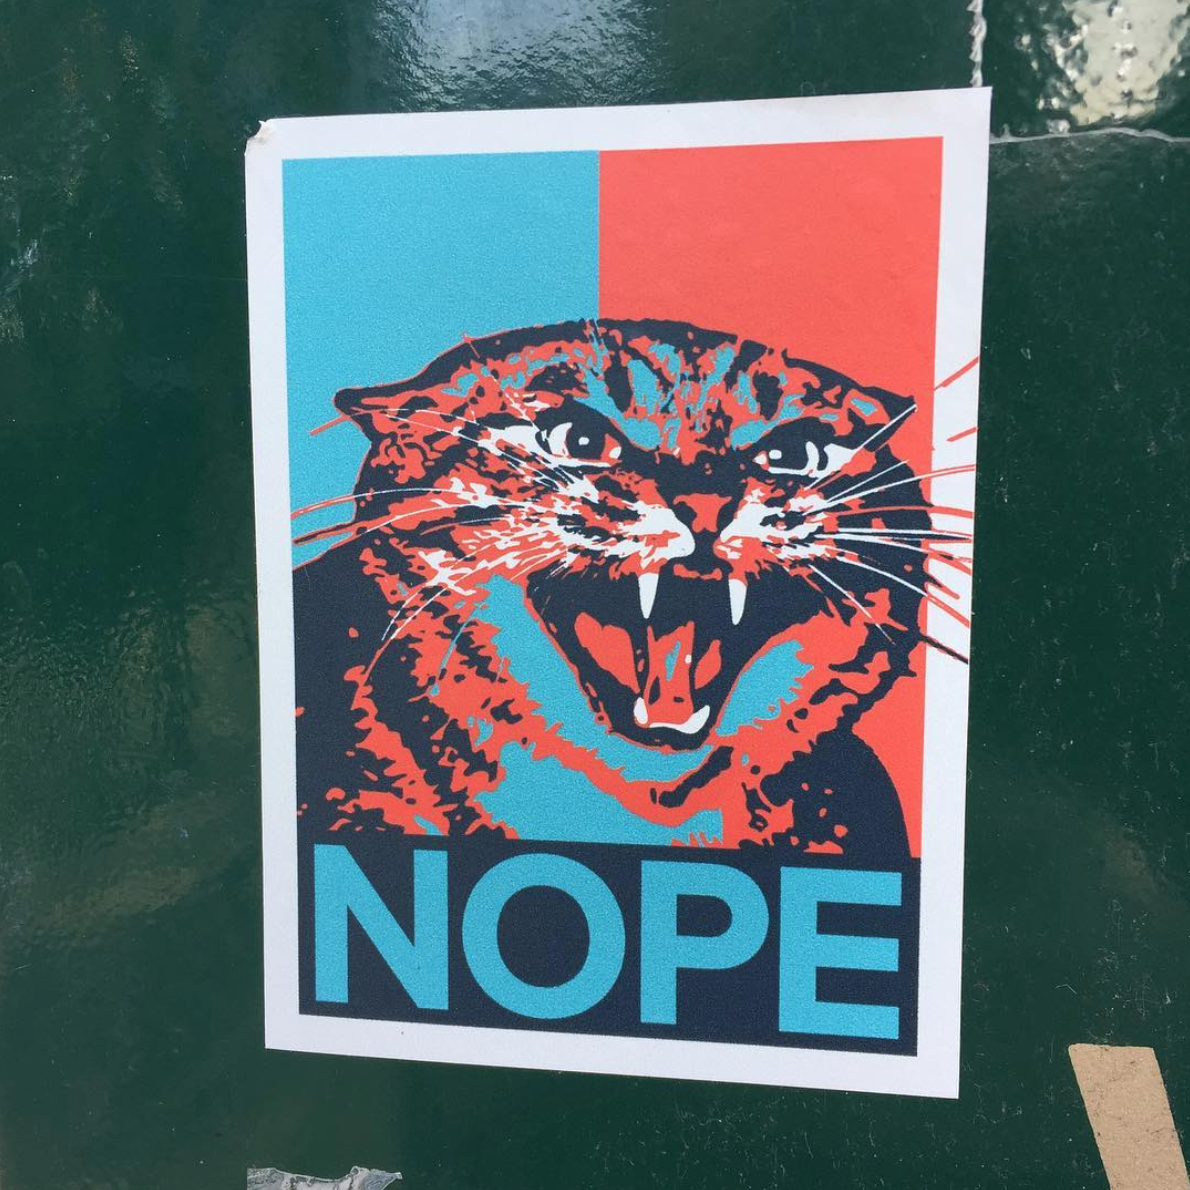 Picture of Cat in the design of President Obama's original campaign Hope poster saying "Nope"